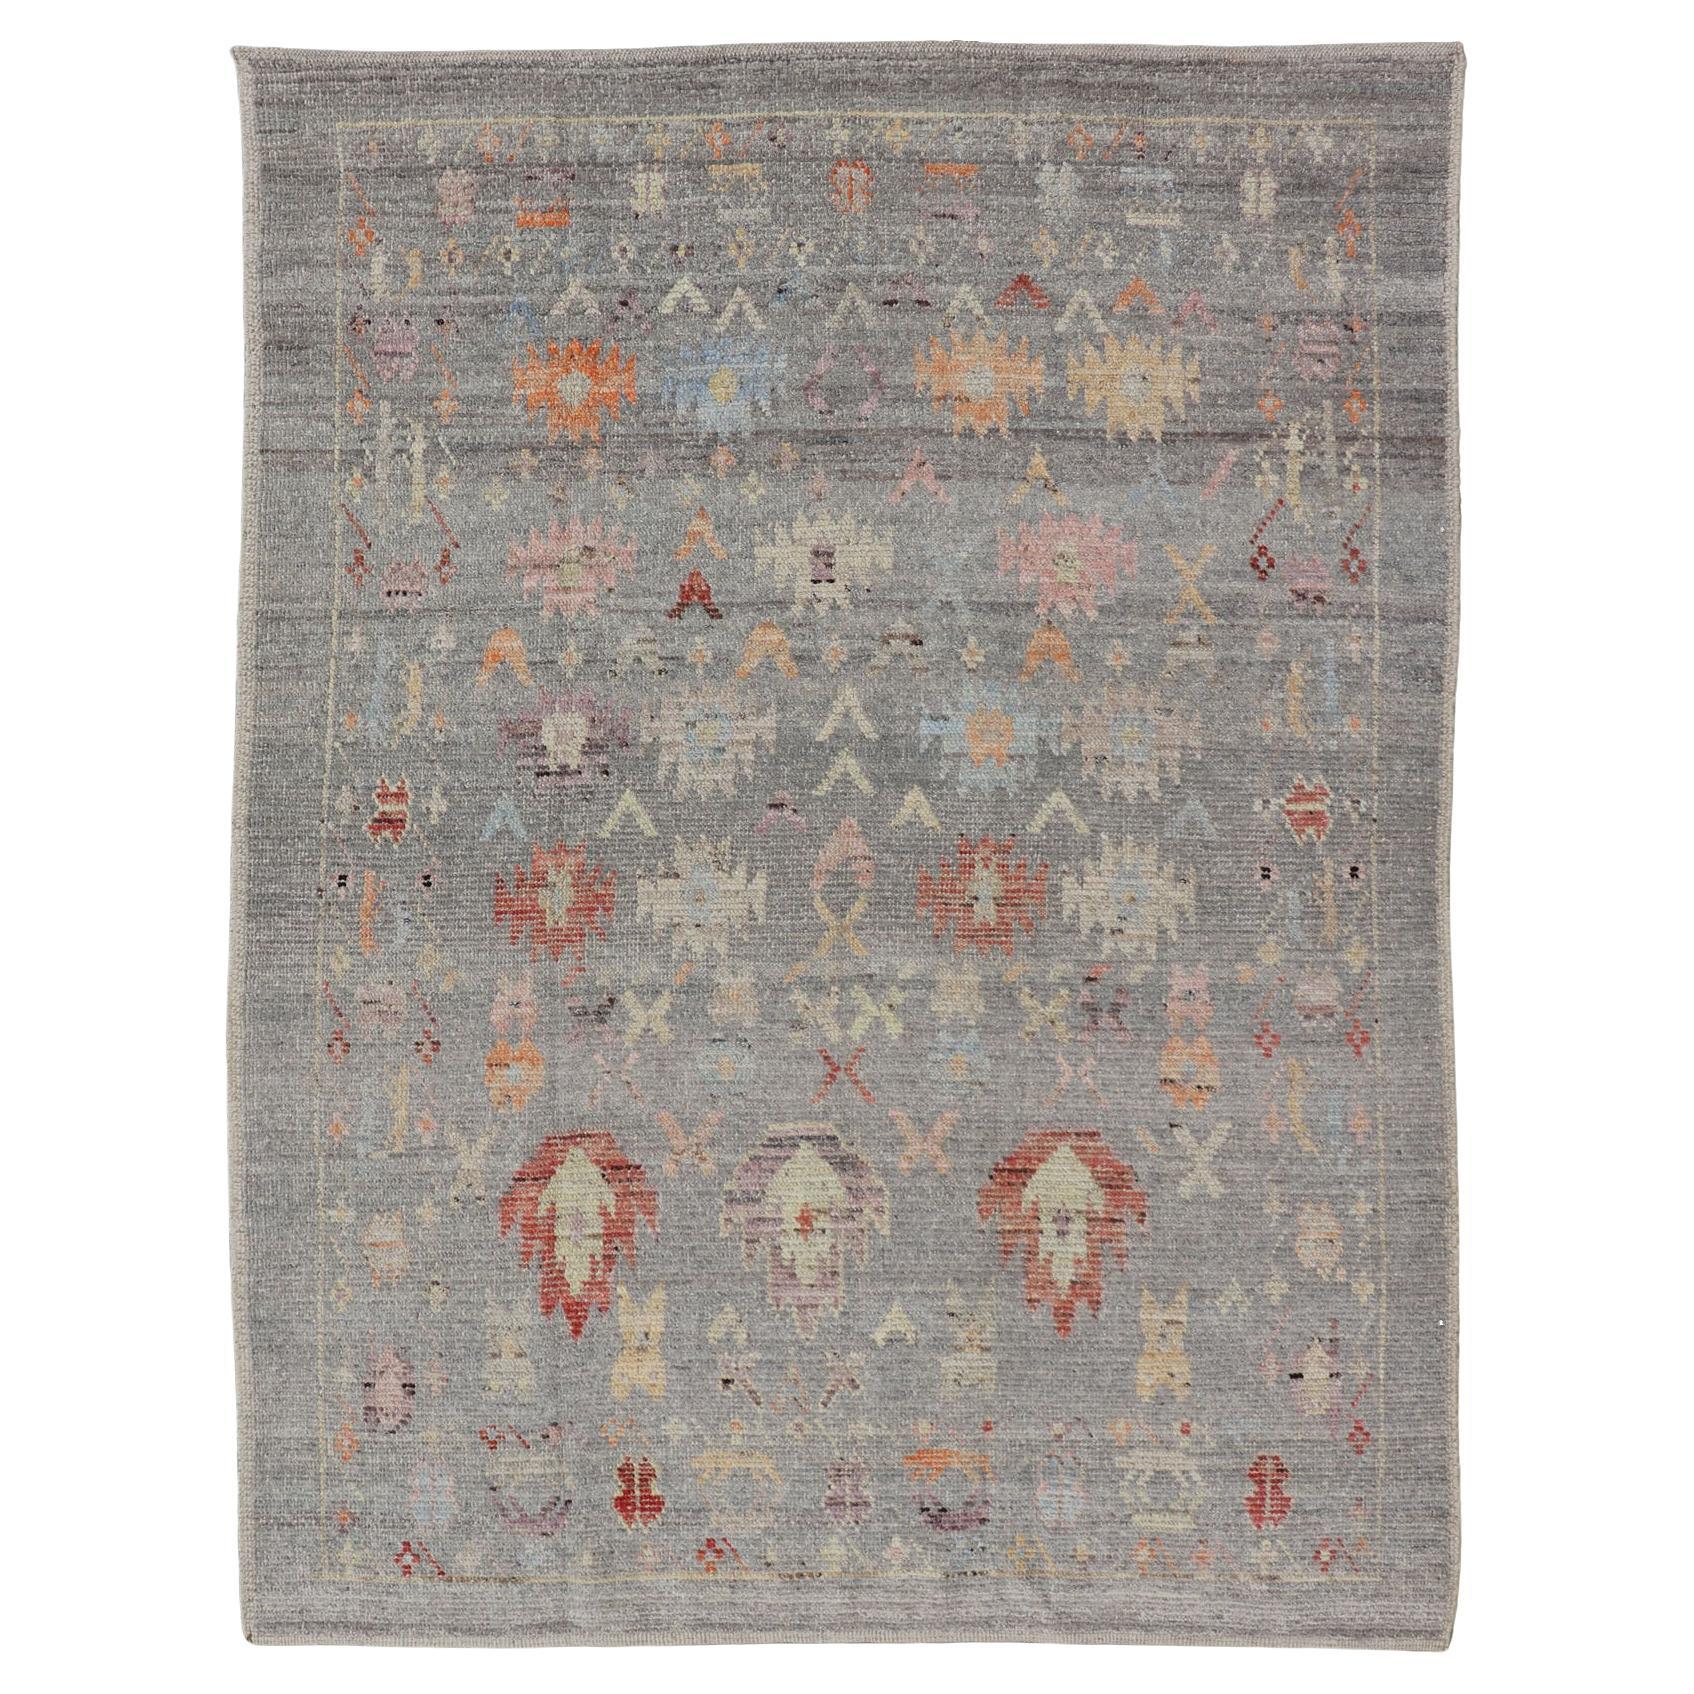 Modern Casual Afghan Tribal Designed Rug on a Light Gray Field